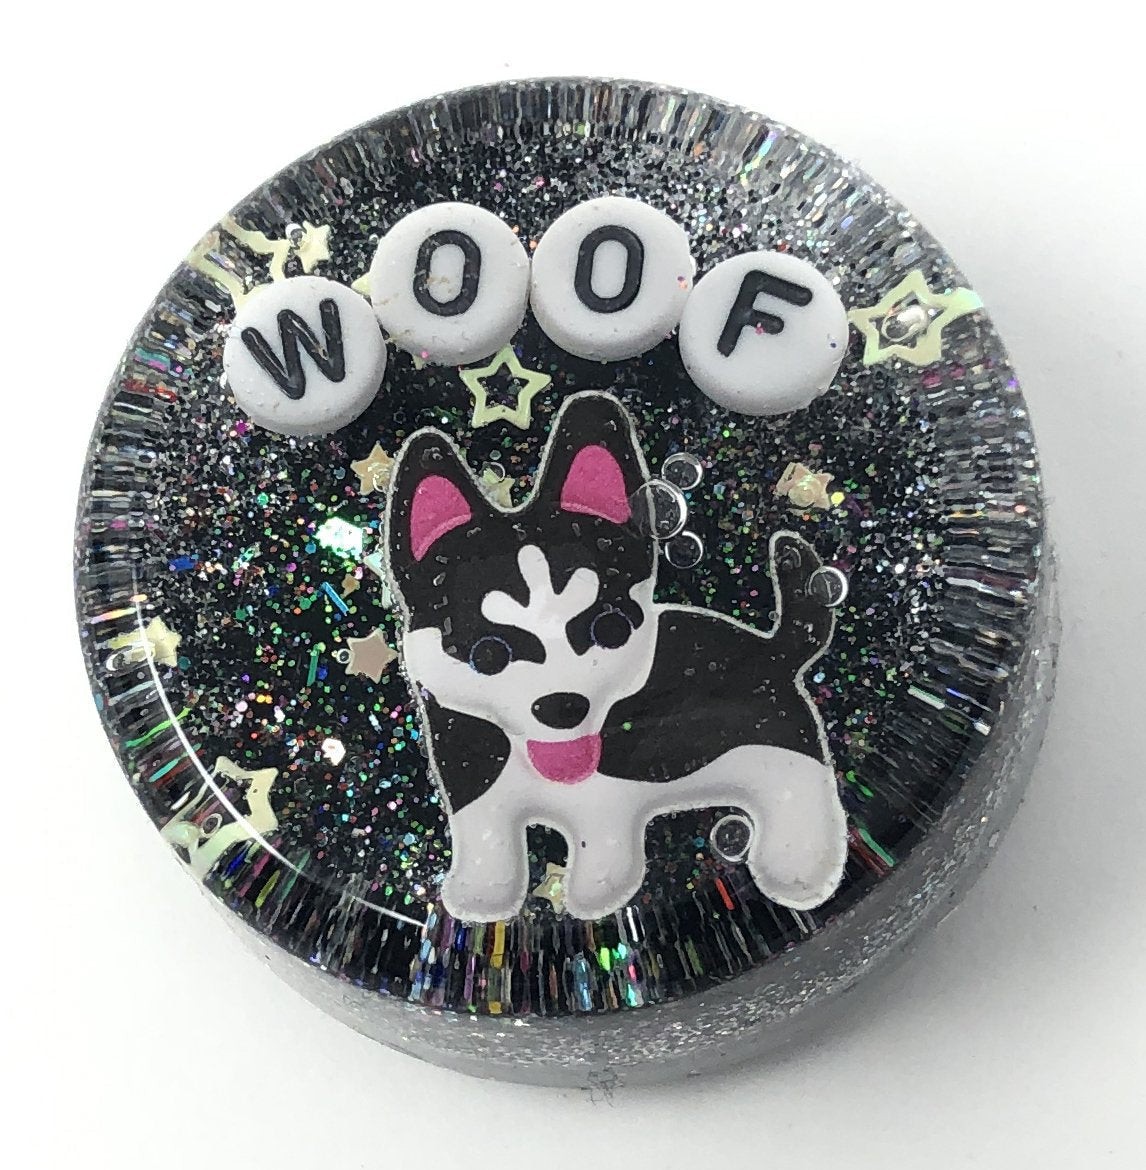 Woof - Shower Art - READY TO SHIP